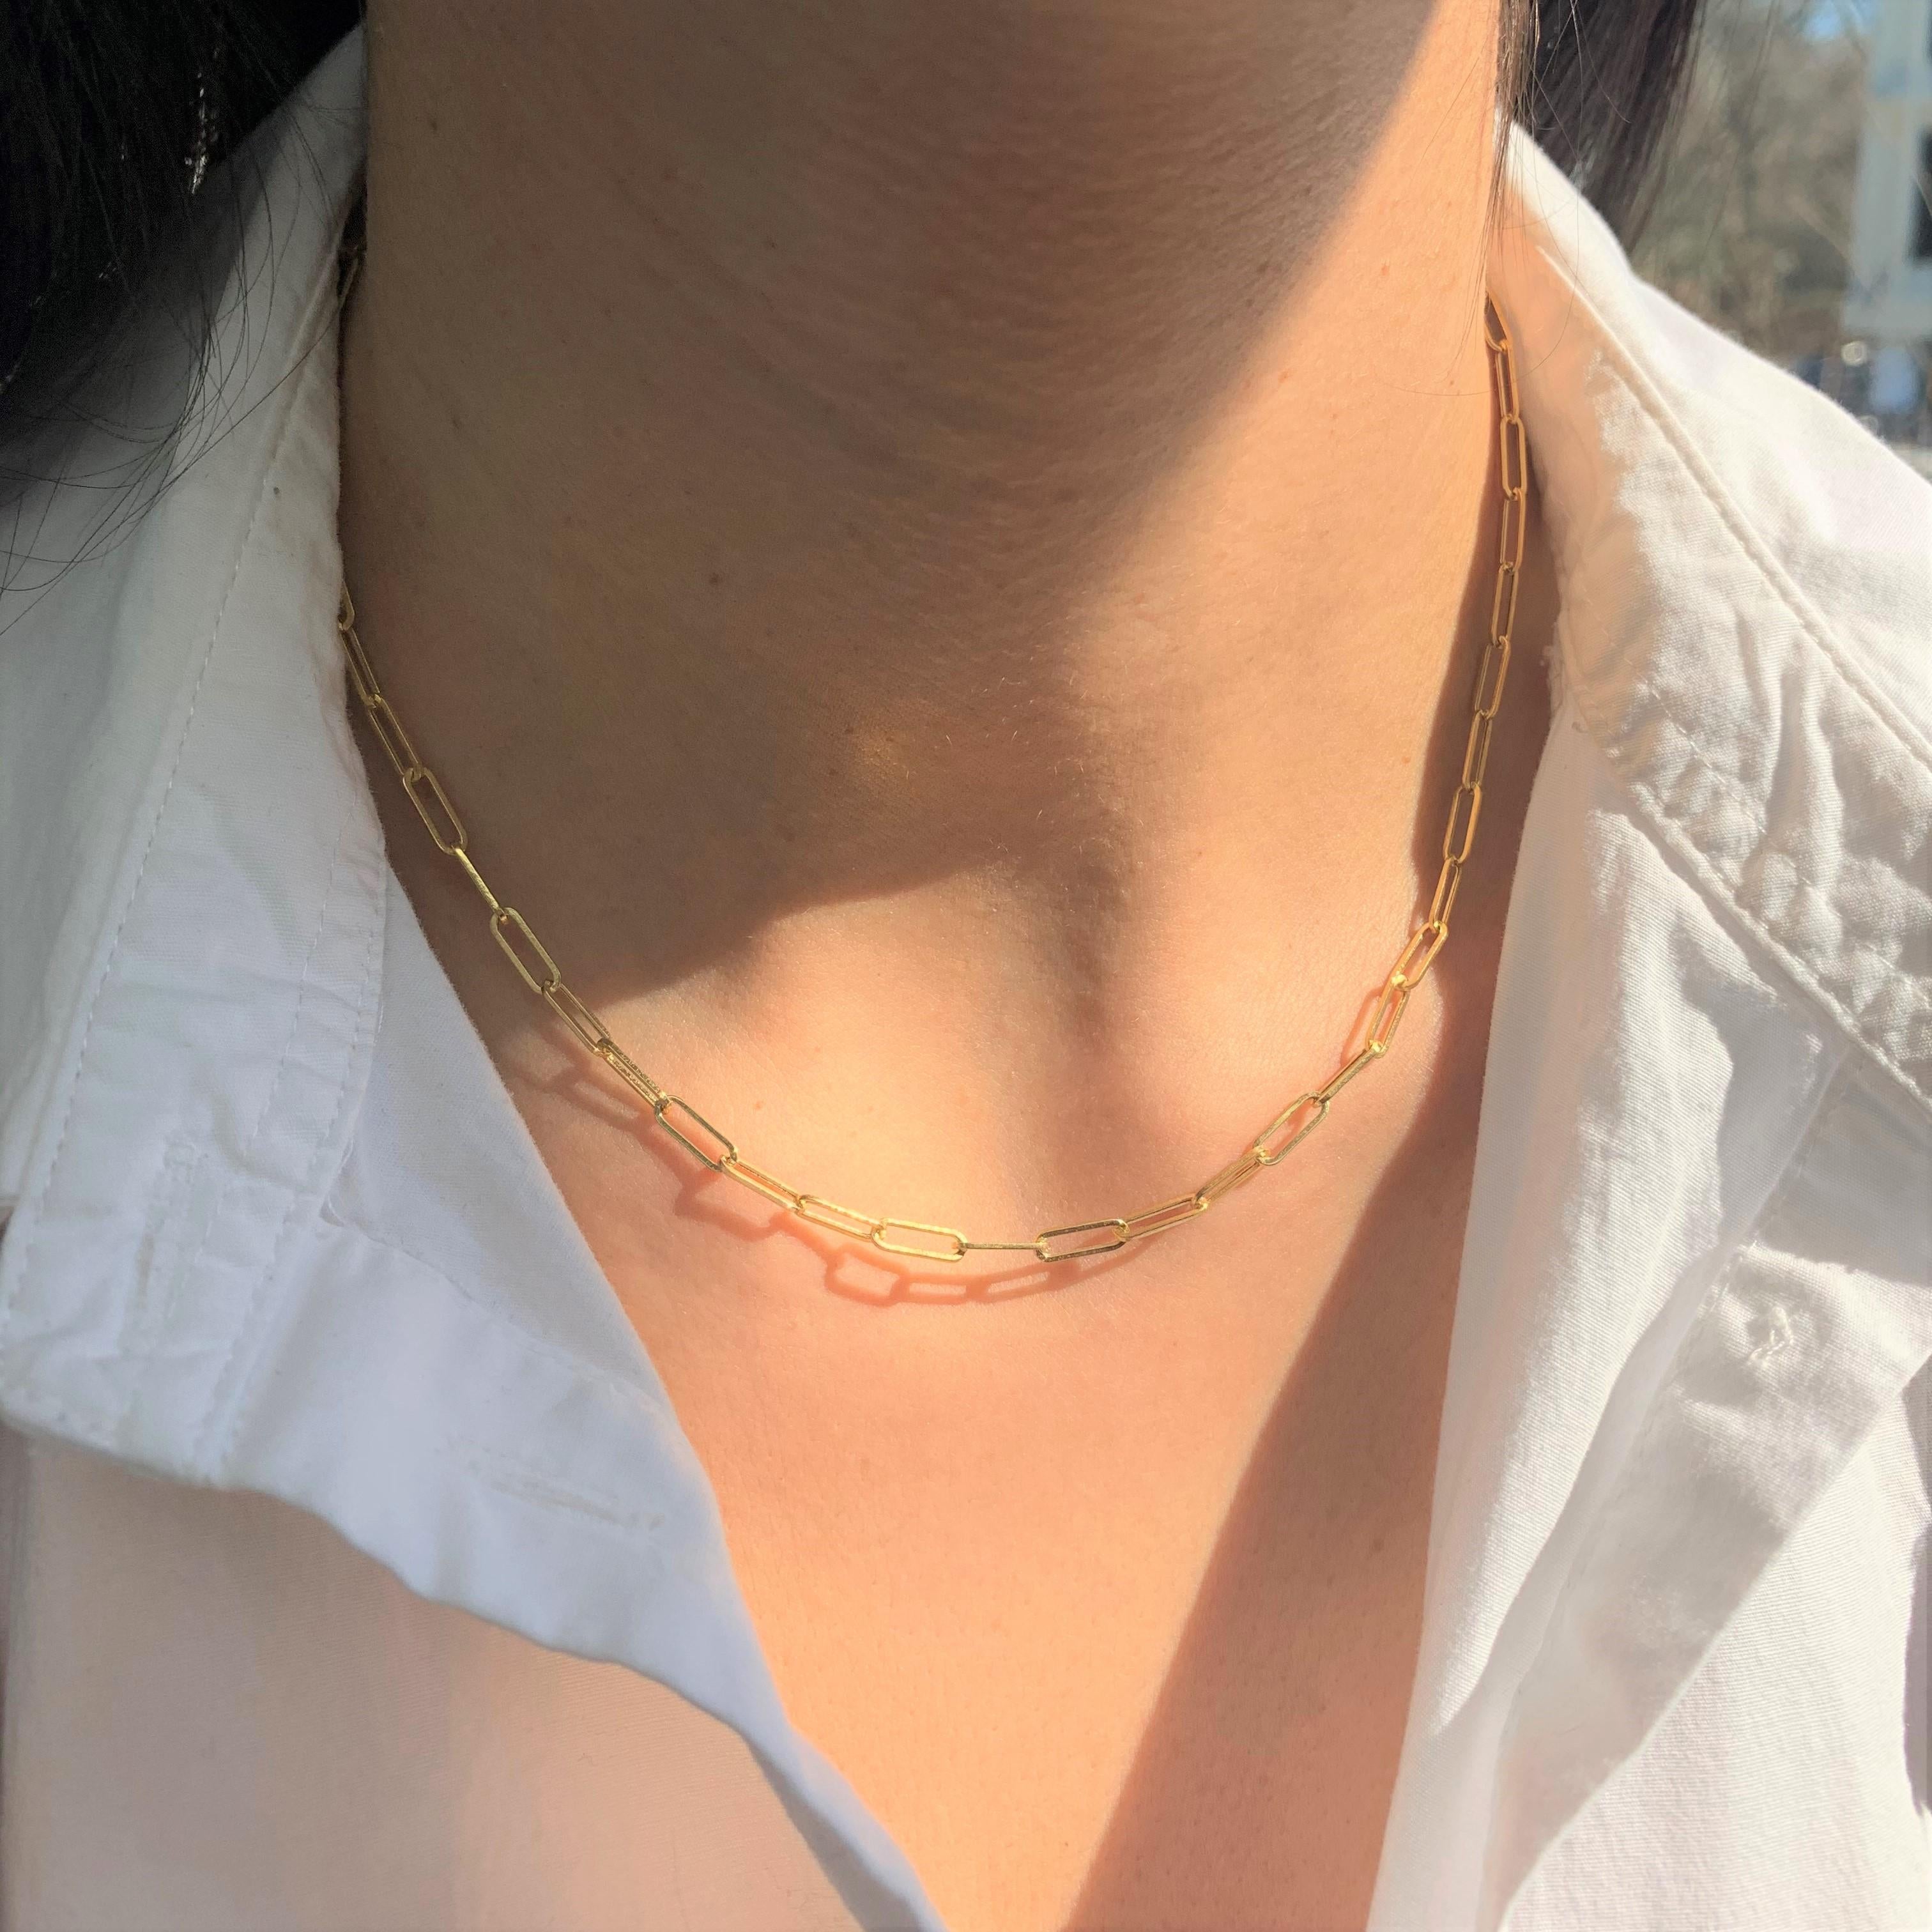 how to wear a paperclip necklace